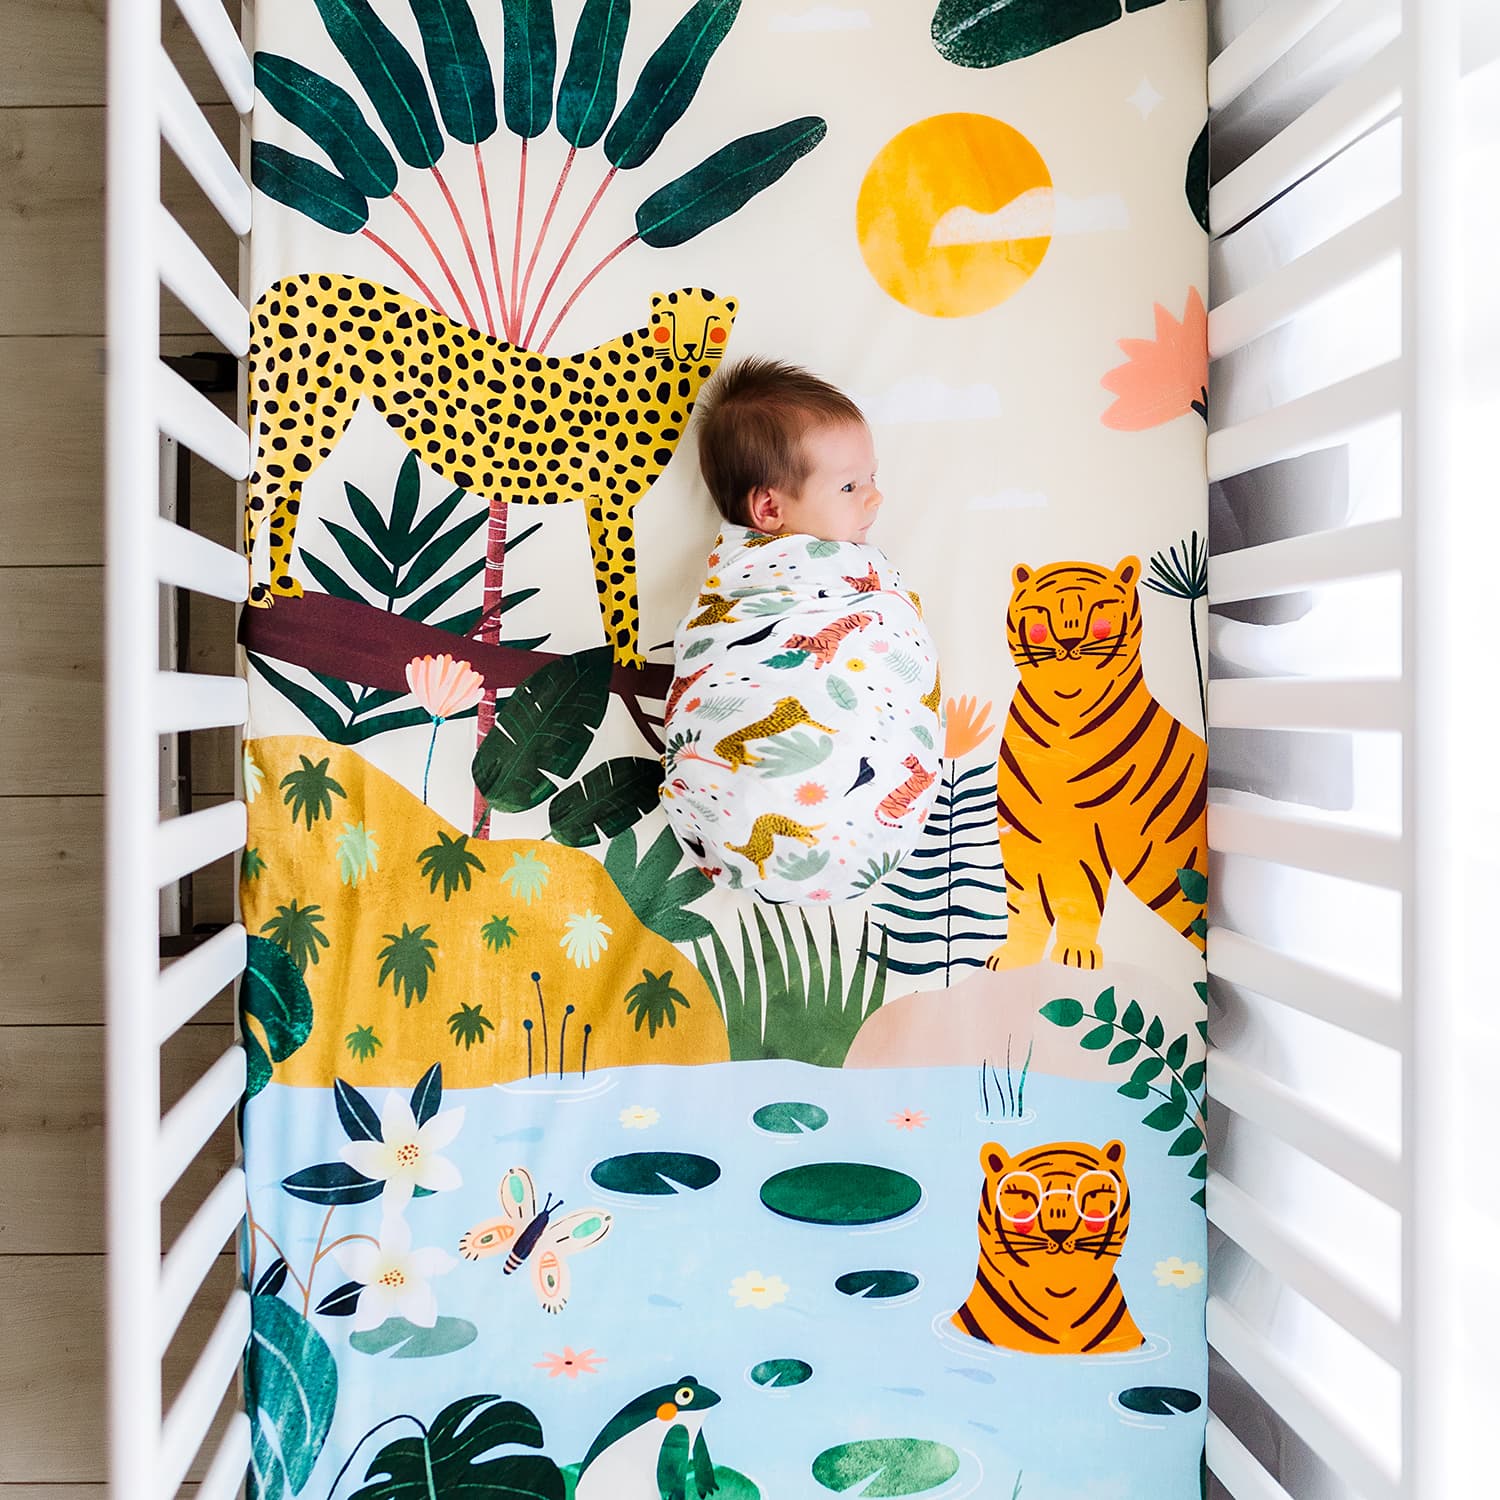 jungle crib sheet and matching jungle swaddle print. Pattern includes cheetahs, tigers and wild vegetation. Perfect addition to a jungle nursery or safari nursery.